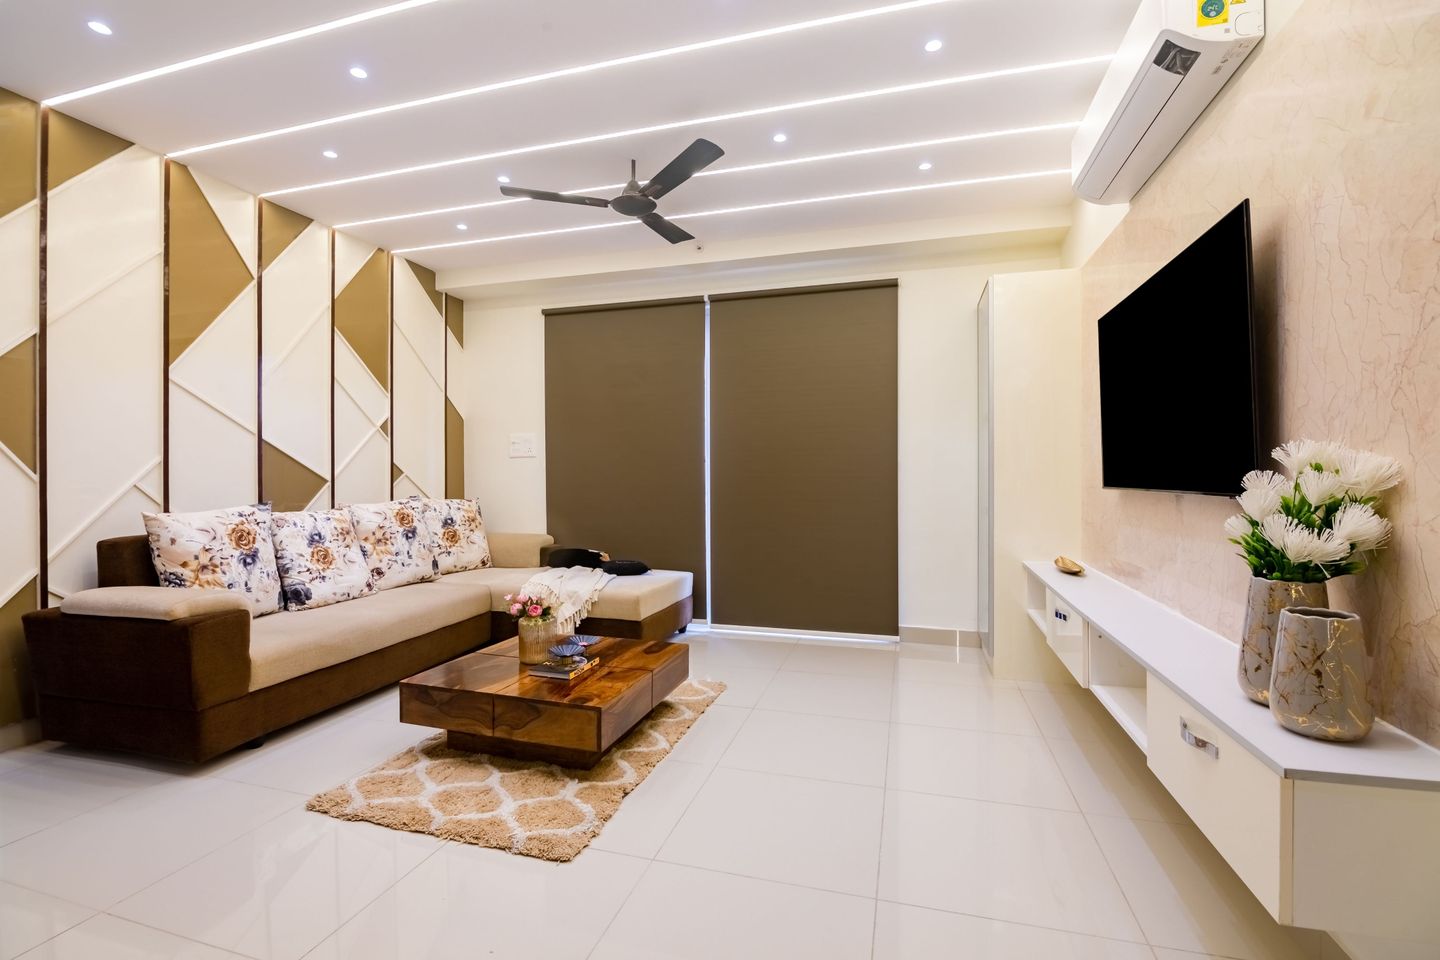 Modern Living Room Wall Design With White And Brown Paint